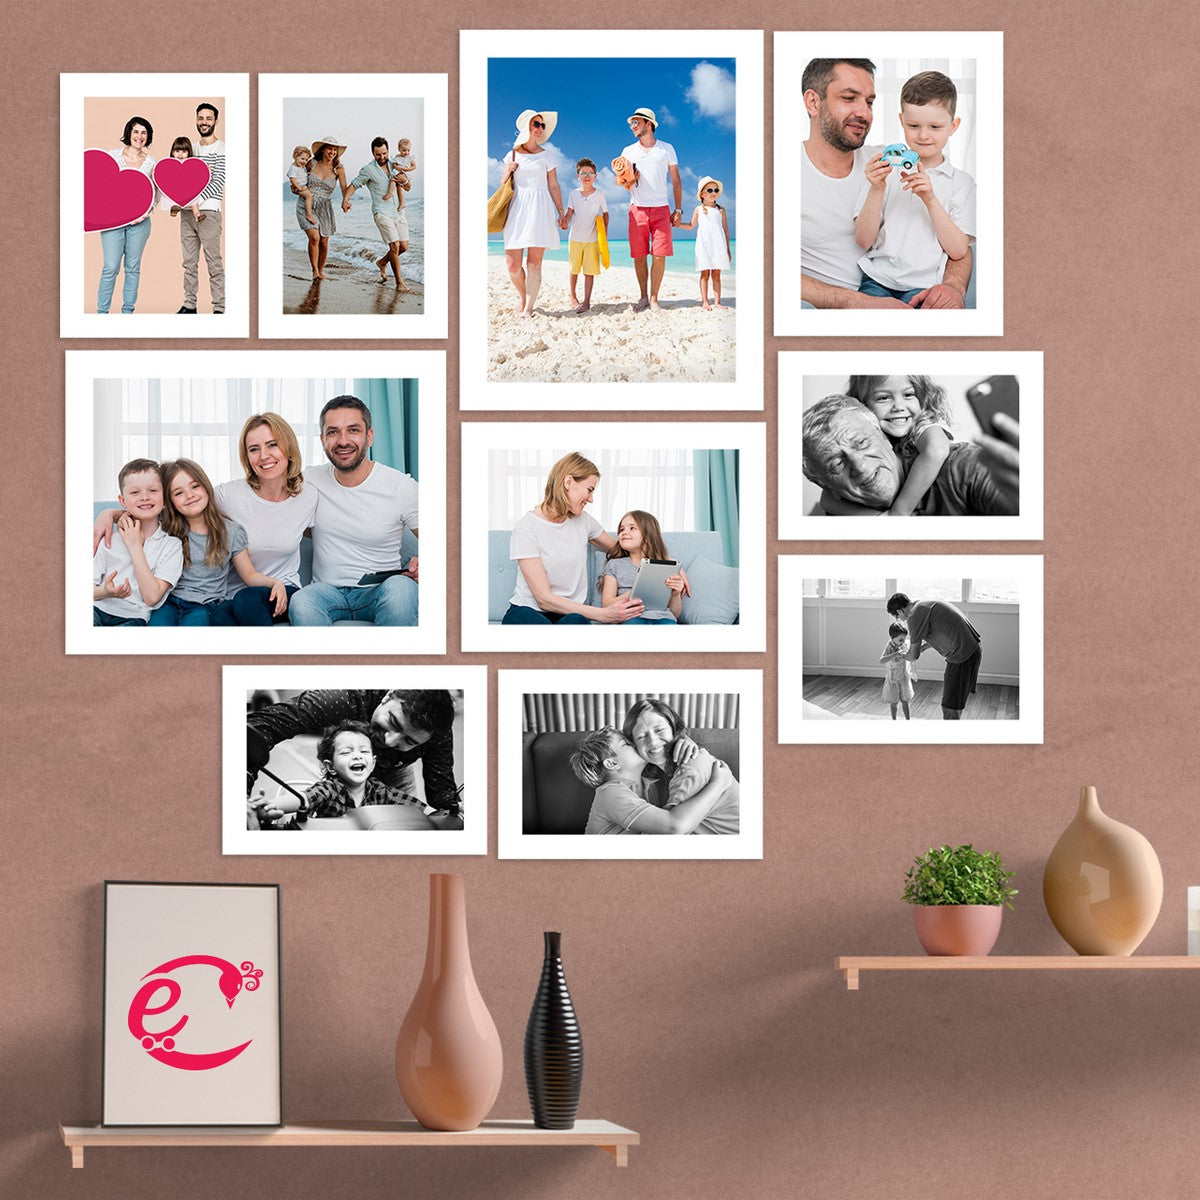 Memory Wall Collage Photo Frame - Set of 10 Photo Frames for 6 Photos of 5"x7", 2 Photos of 6"x8" and 2 Photos of 8"x10" 1